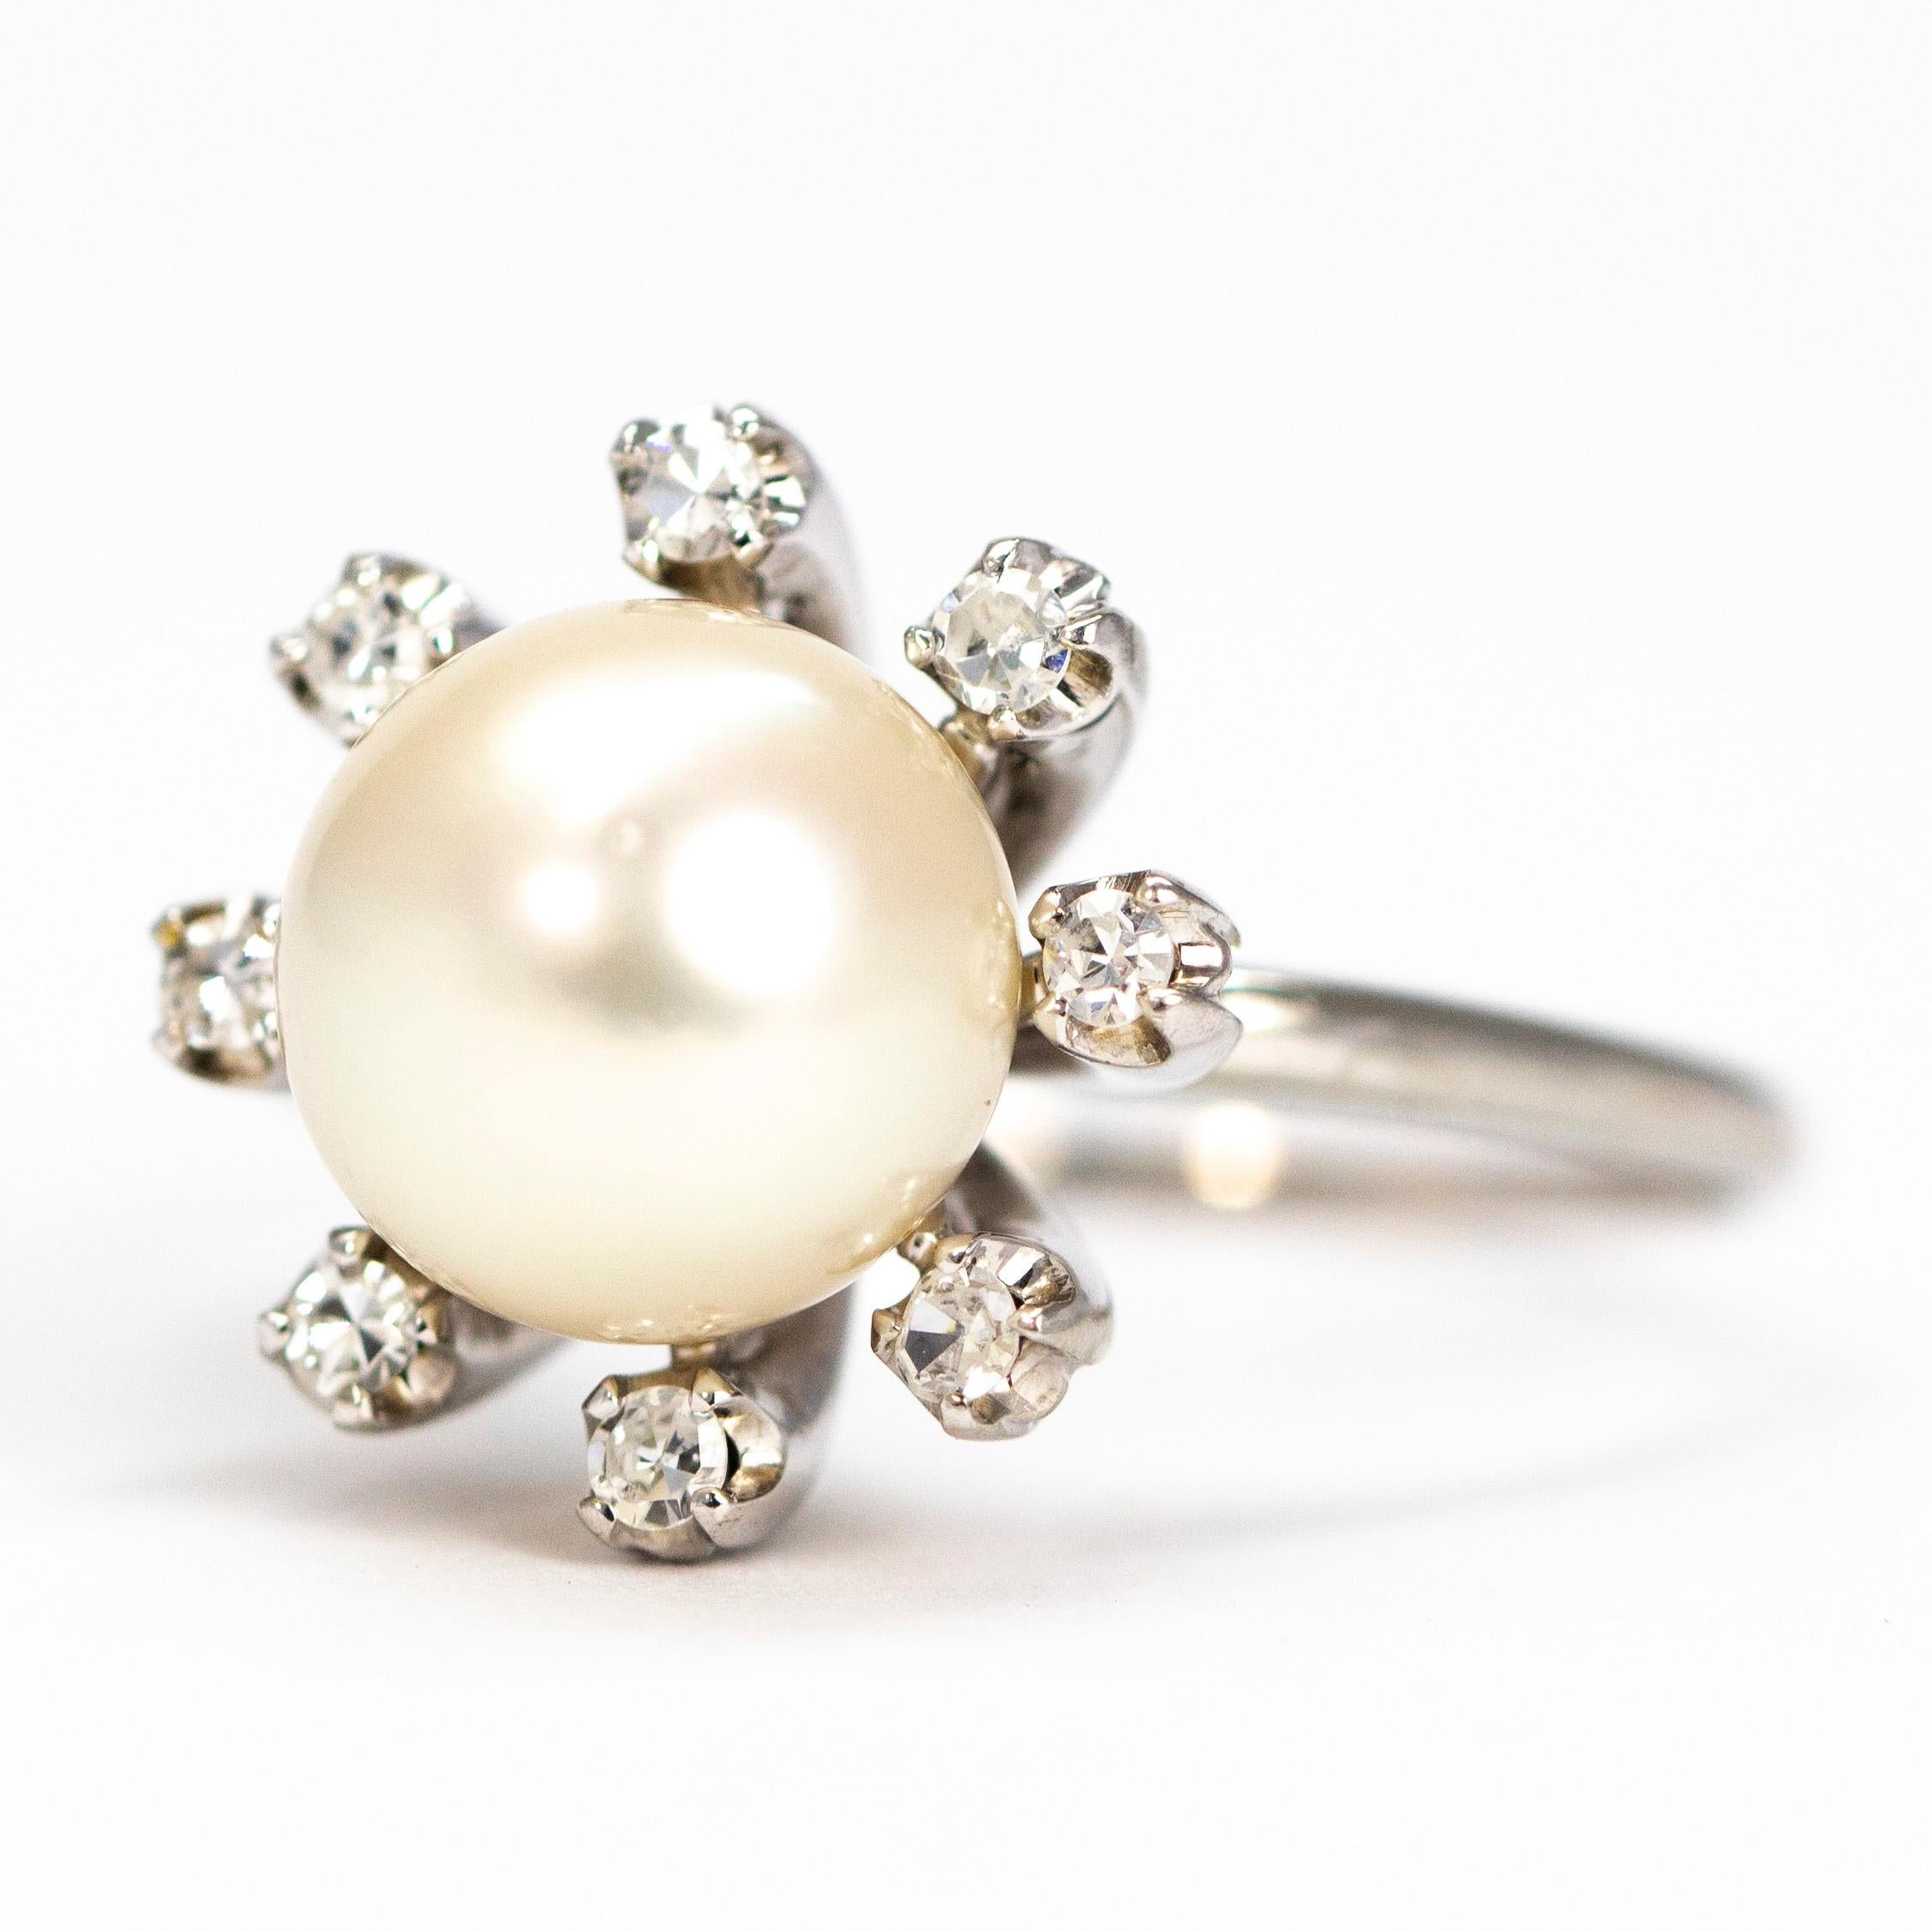 This stunning shimmering pearl is perched upon and surrounded by single diamonds each singularly set. The diamonds measure 4pts each and the ring is modelled in 14ct white gold which complements the pearl and diamonds perfectly.

Ring Size: R or 8